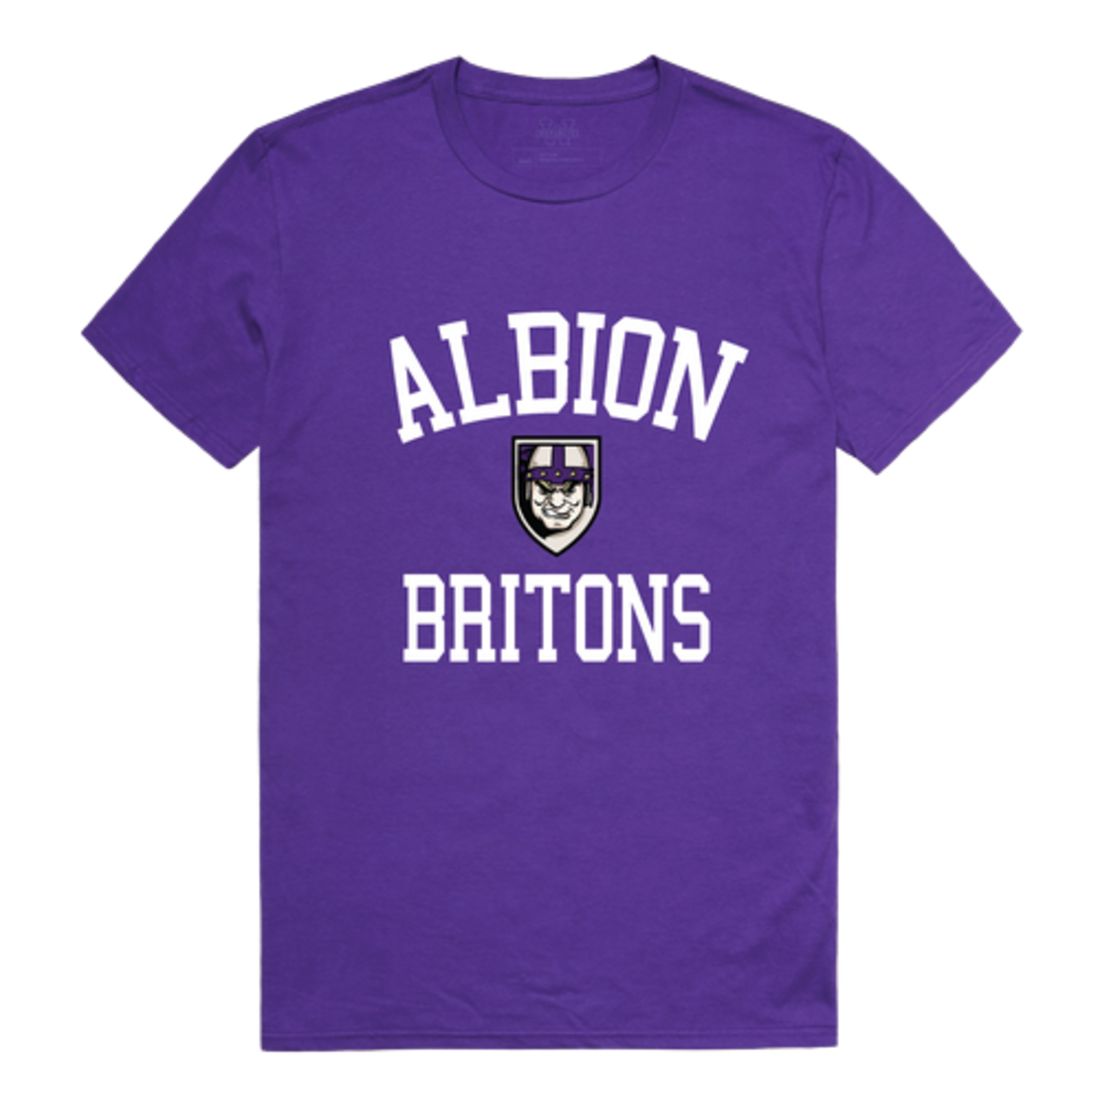 Albion College Britons Arch T-Shirt Tee